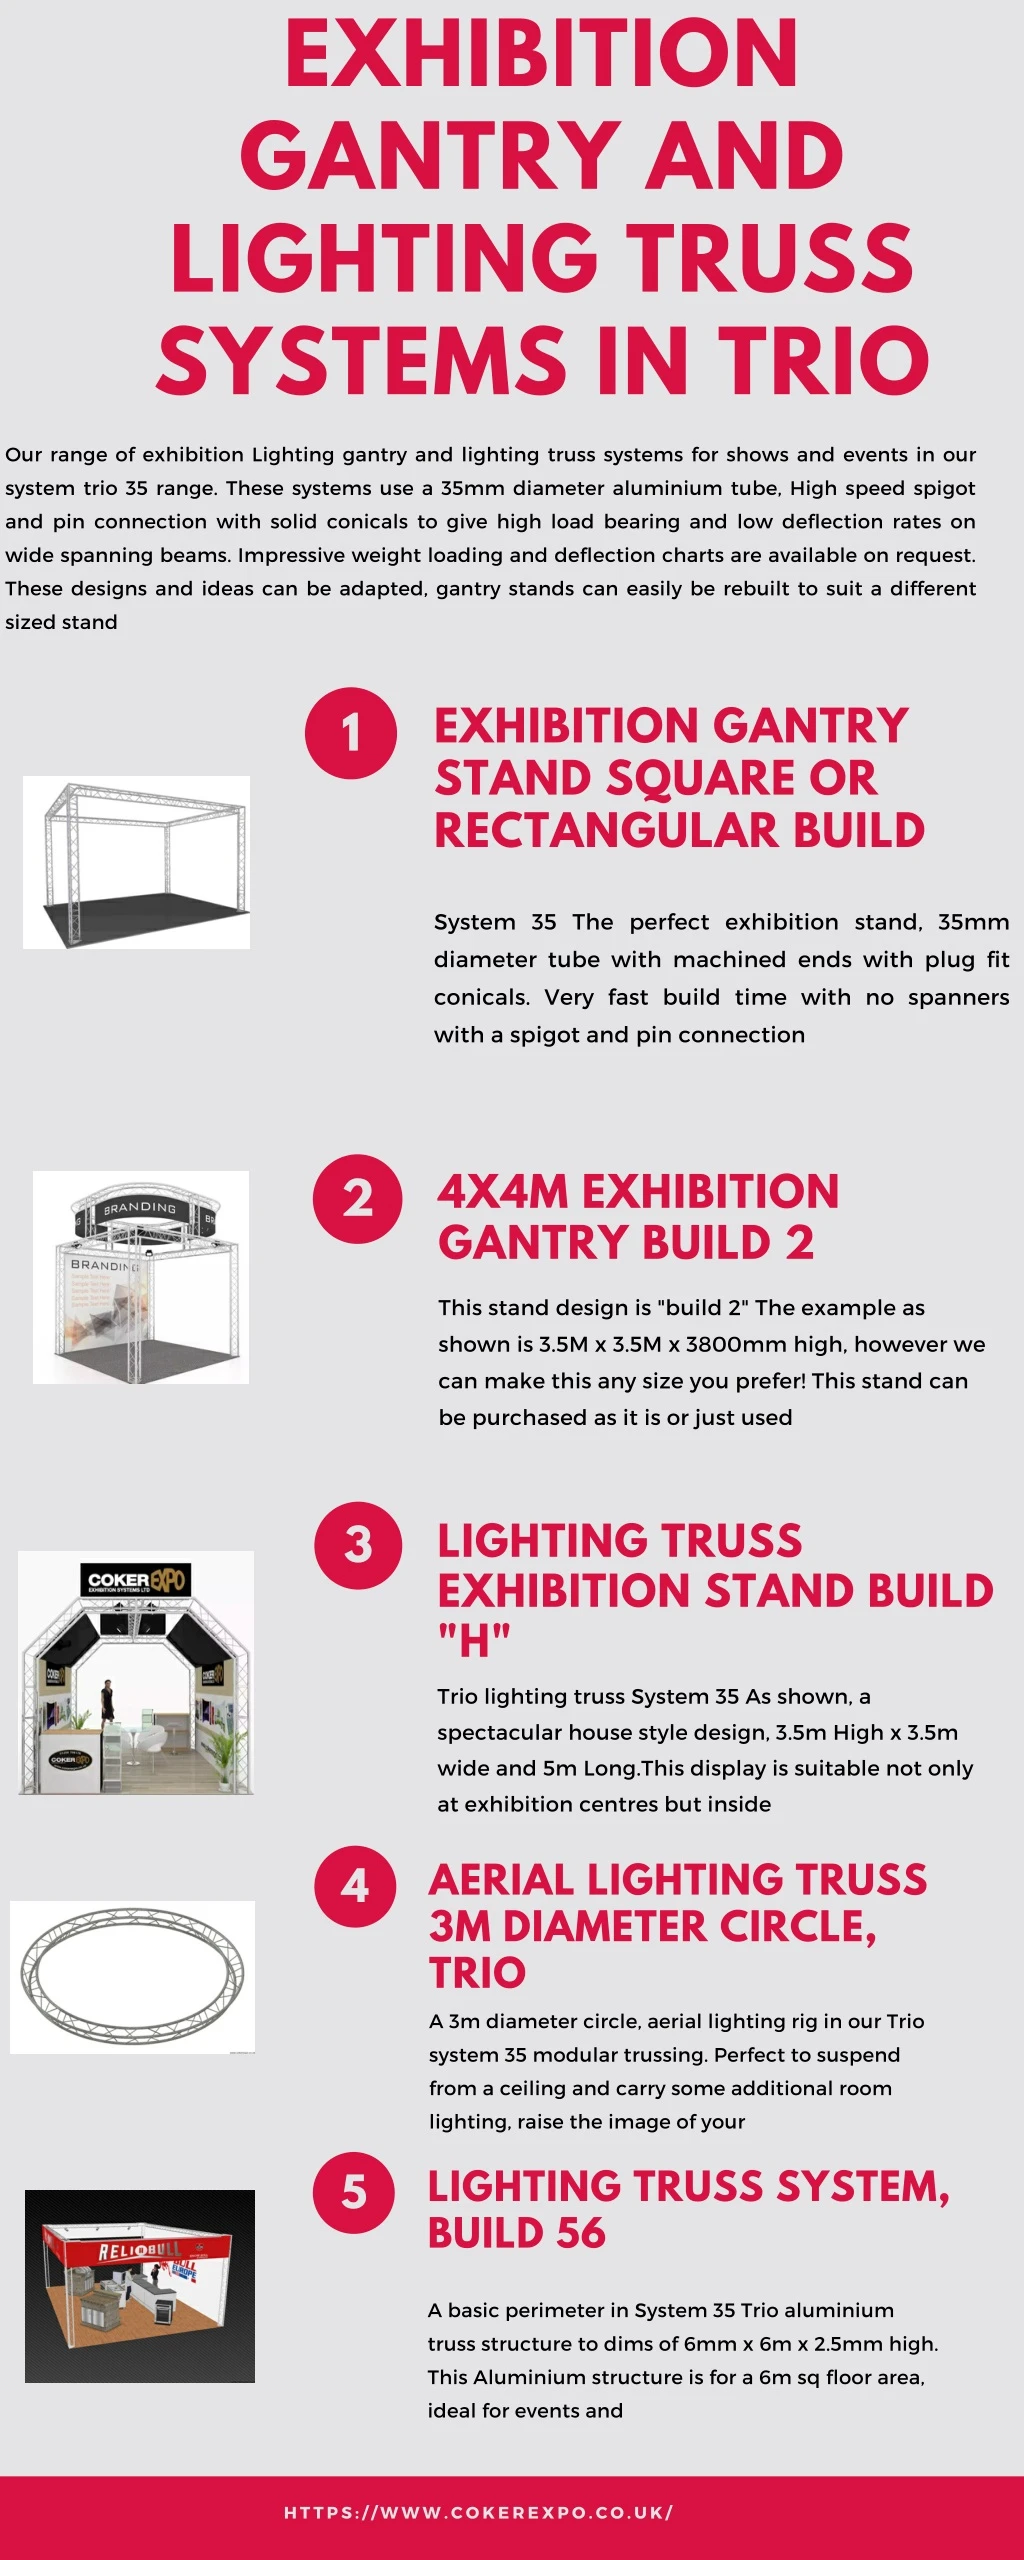 exhibition gantry and lighting truss systems